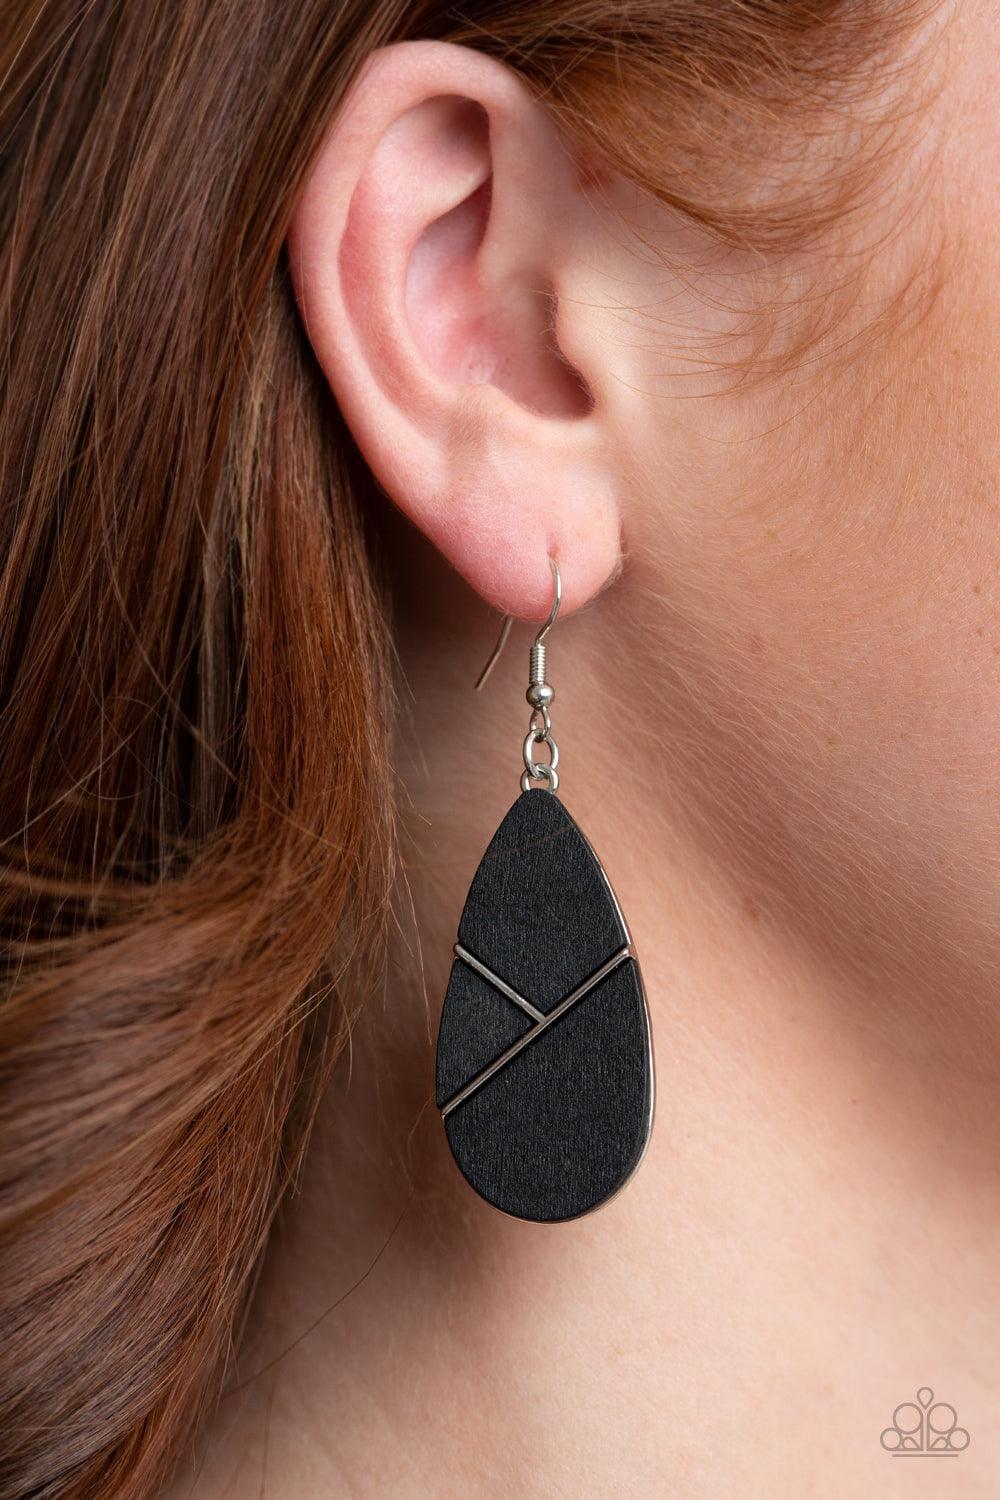 Paparazzi Accessories - Sequoia Forest - Black Earrings - Bling by JessieK